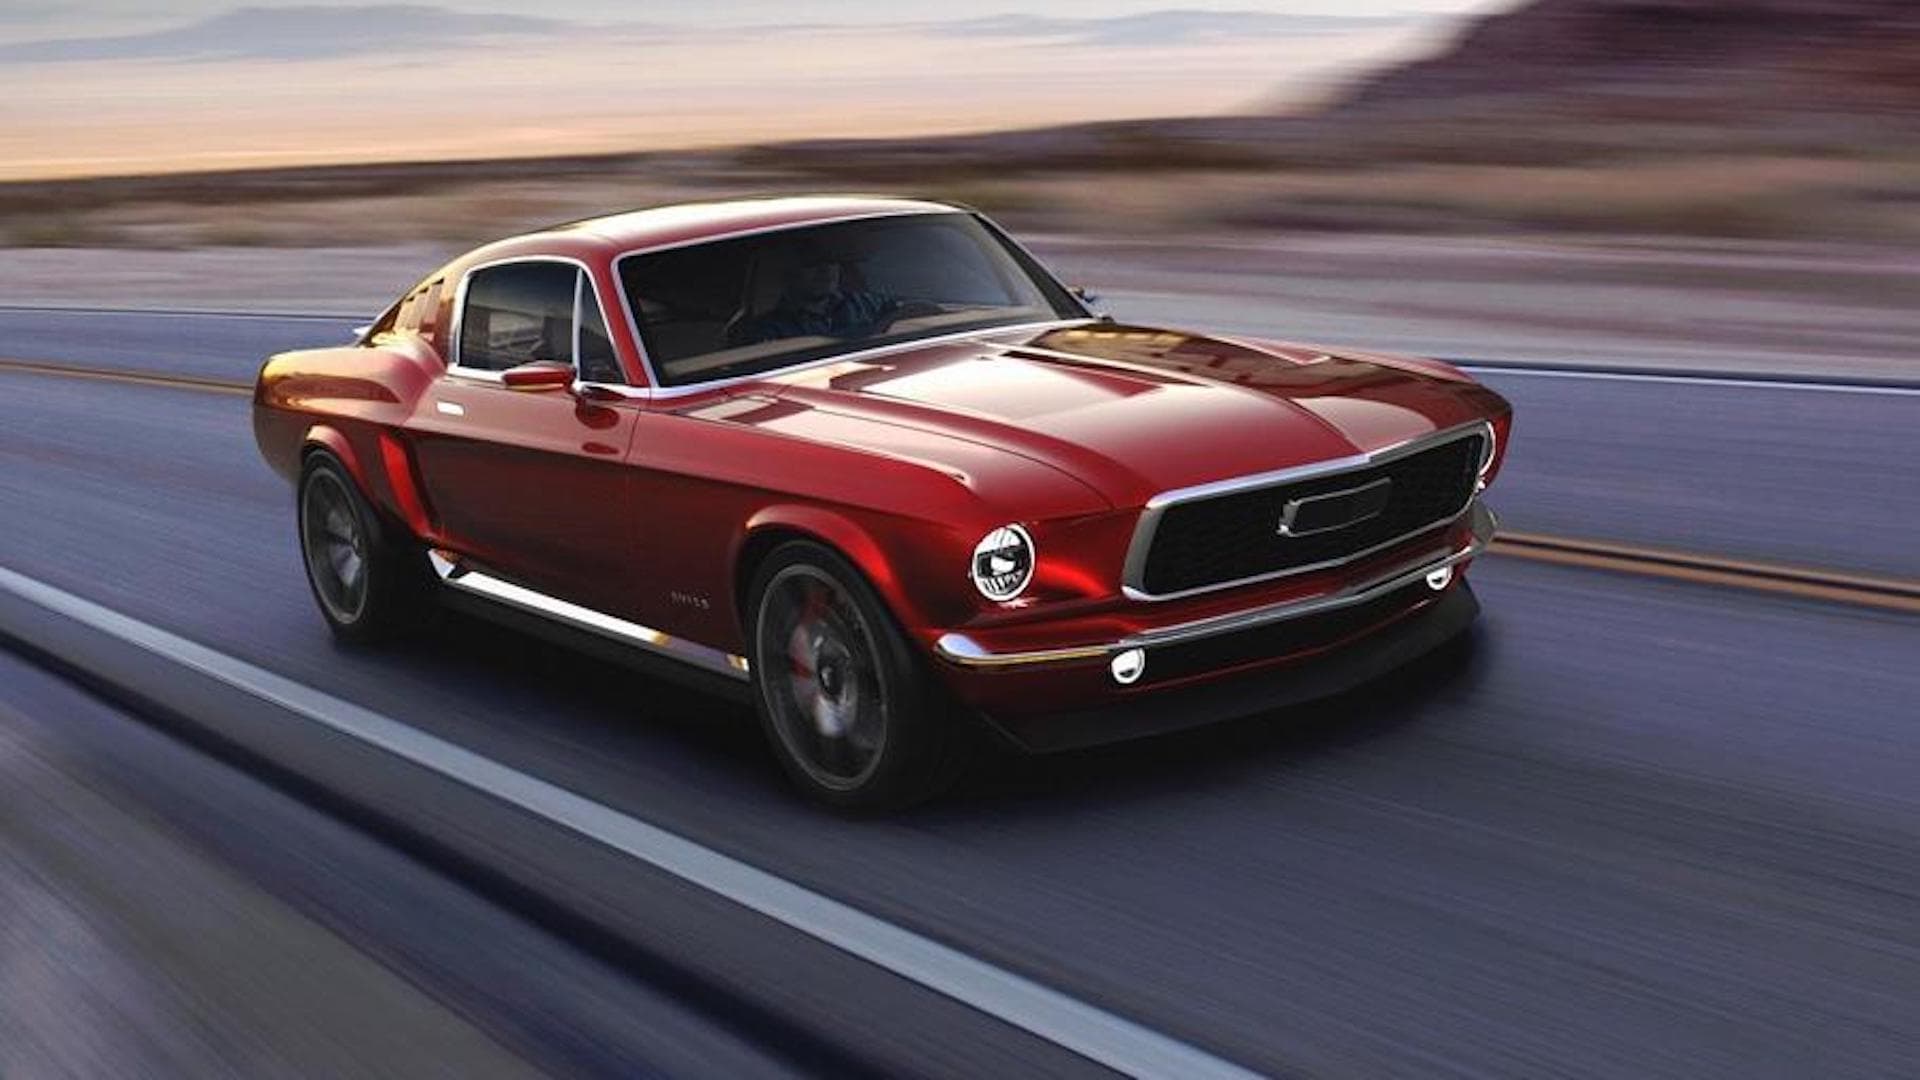 Electric 1967 Ford Mustang Lookalike Has 840 HP and 315 Miles of Range